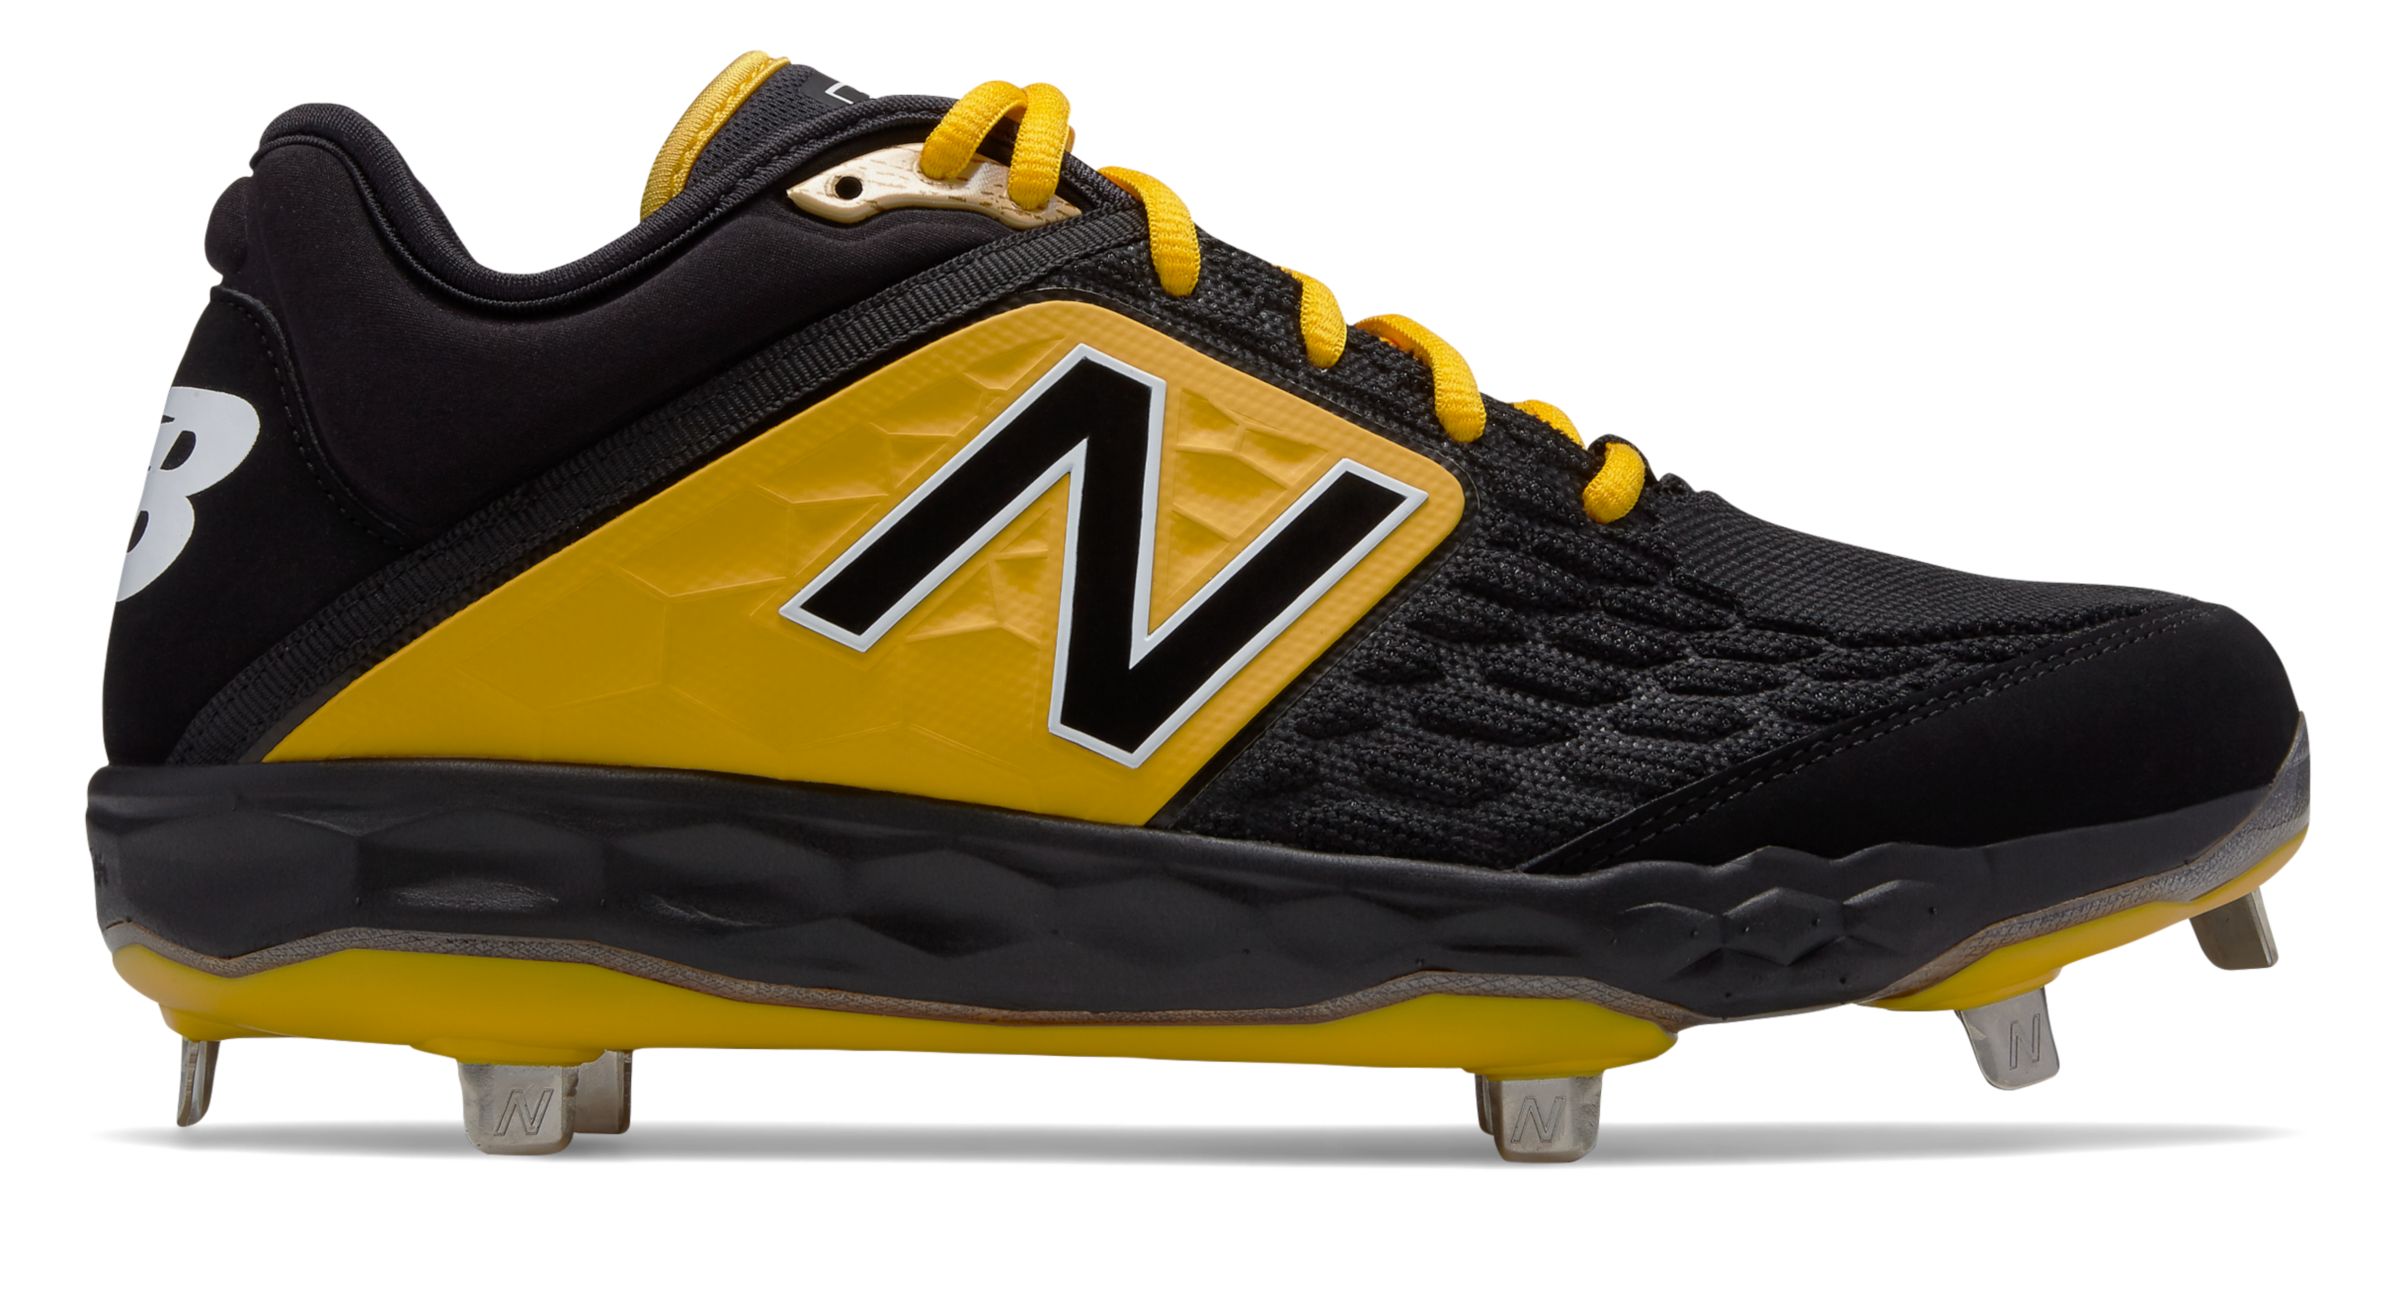 New Balance Fuelcell COMPv3 Low Men's Baseball Cleat